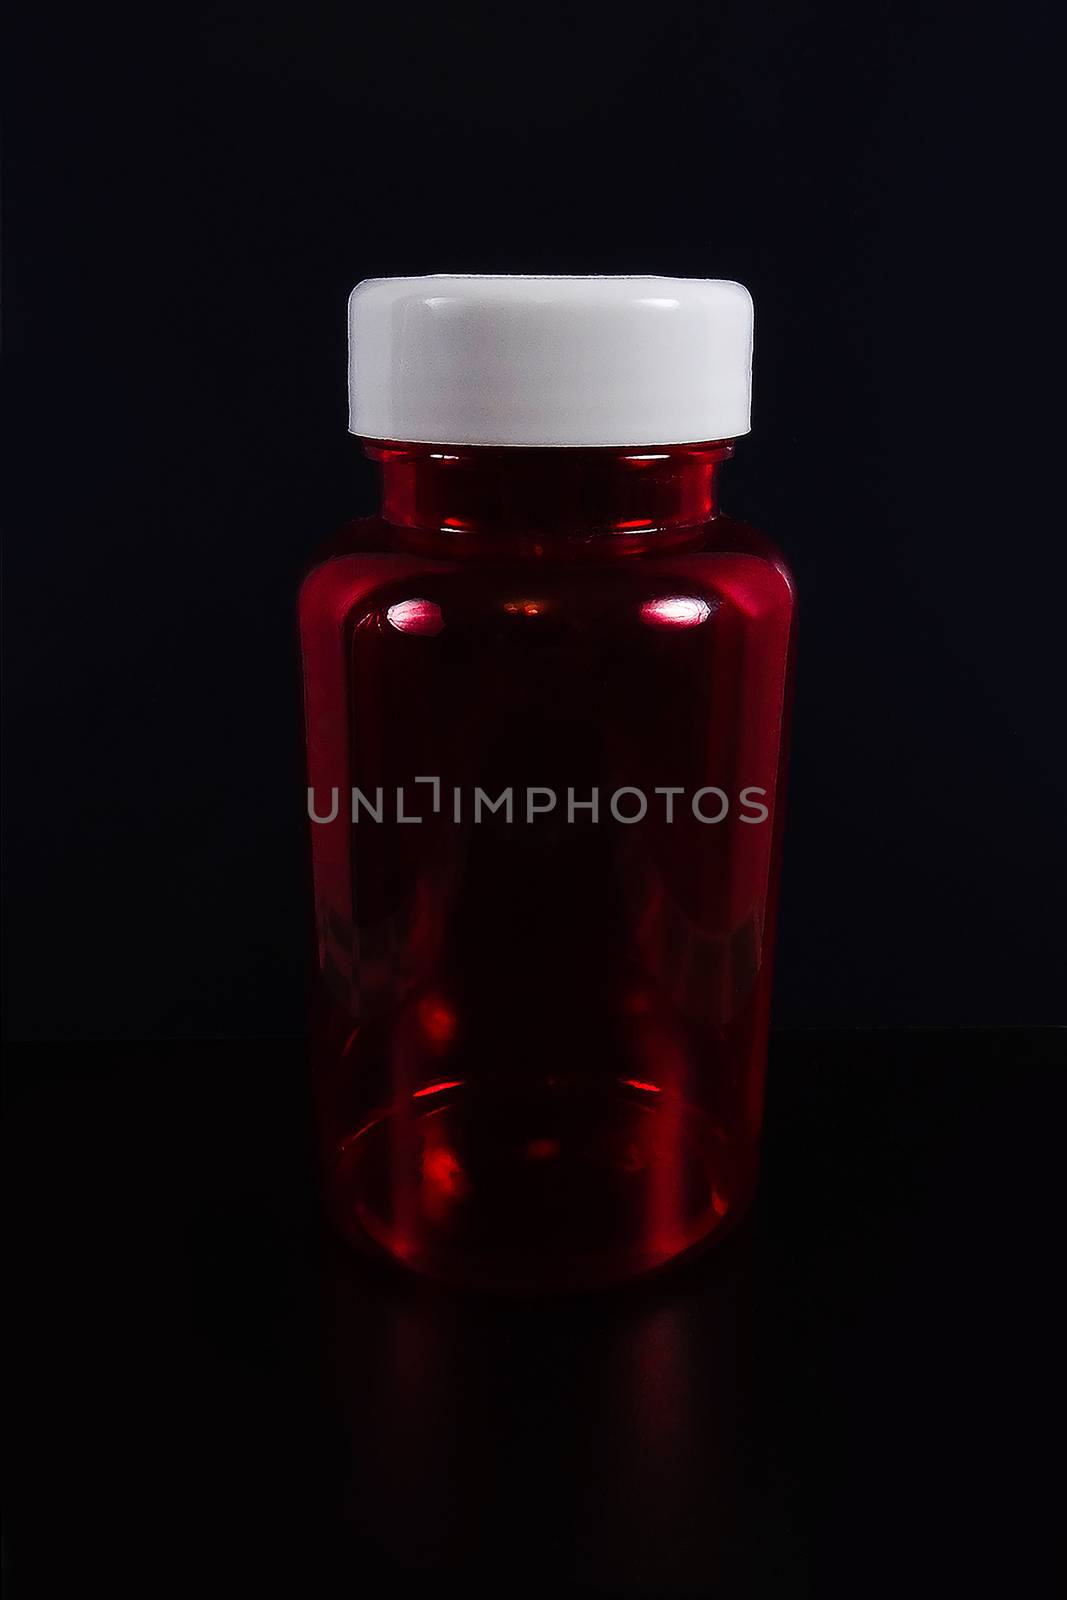 A jar of pills on a black background